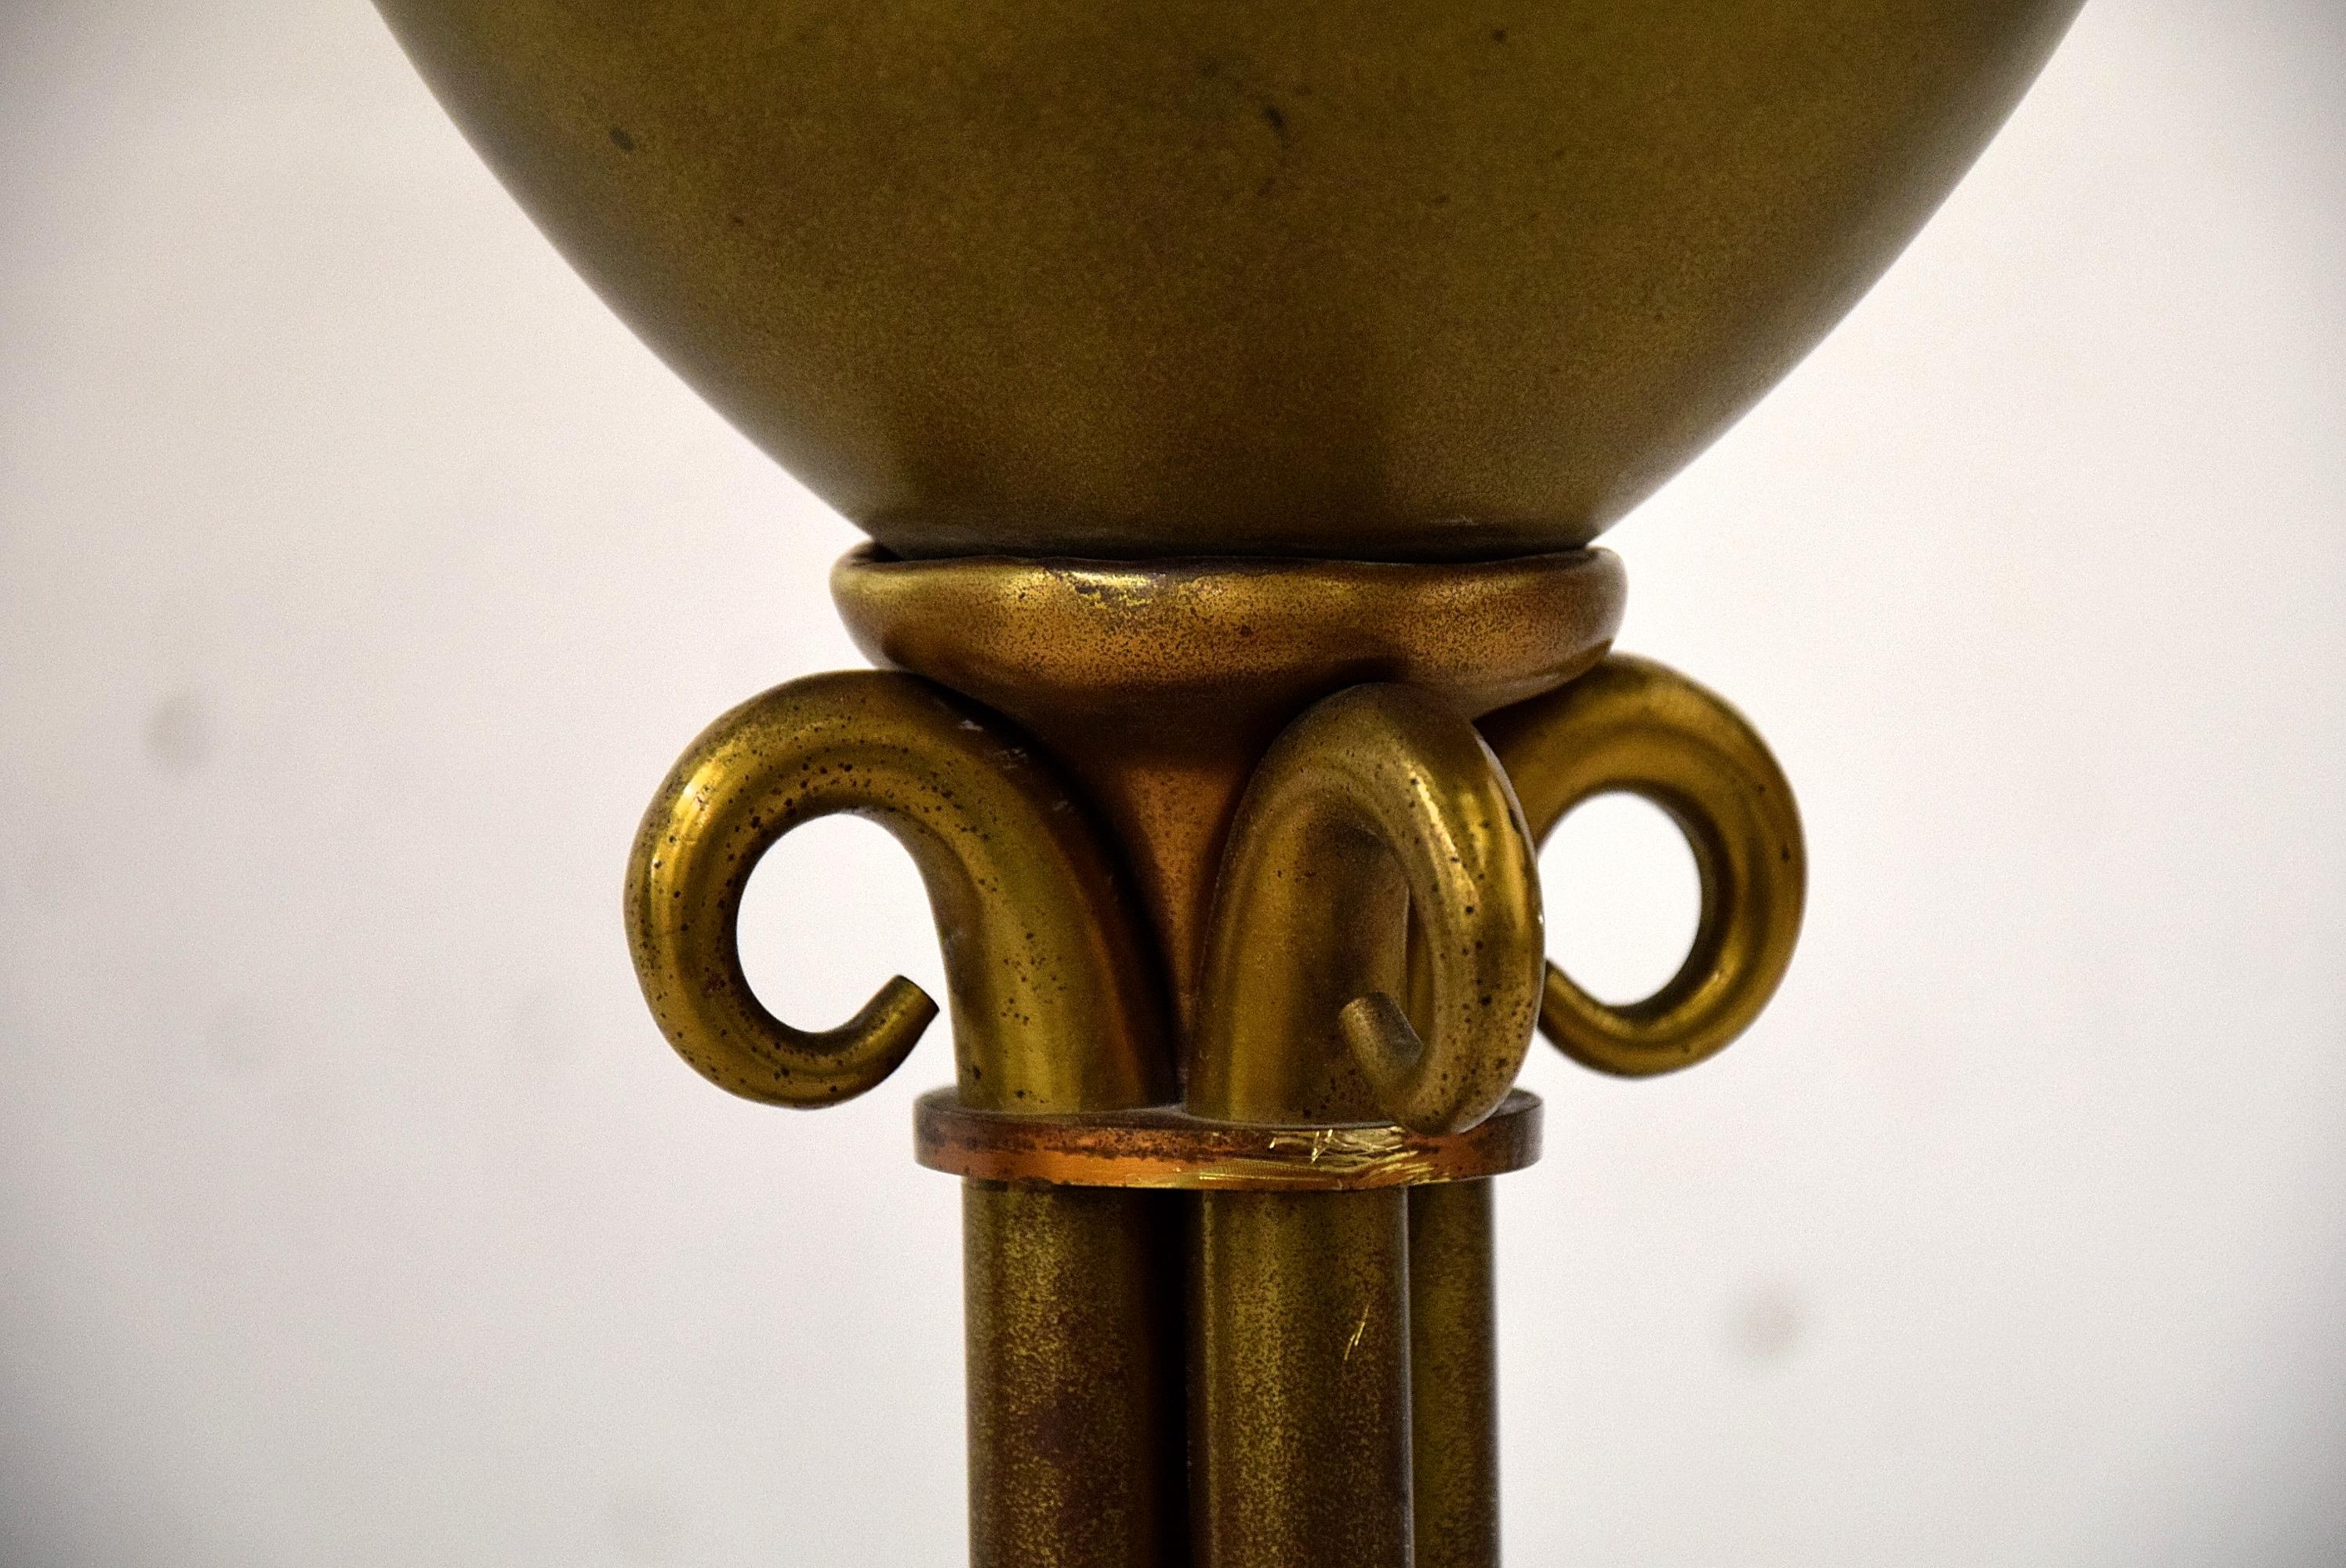 Candleholder Art Deco, 1930. Big brass candleholder from the Amsterdam School a style in architectural and interior art, that manifested between 1910 and 1940.

This rare piece is in great condition with the perfect patina.

Measurements H.63 x